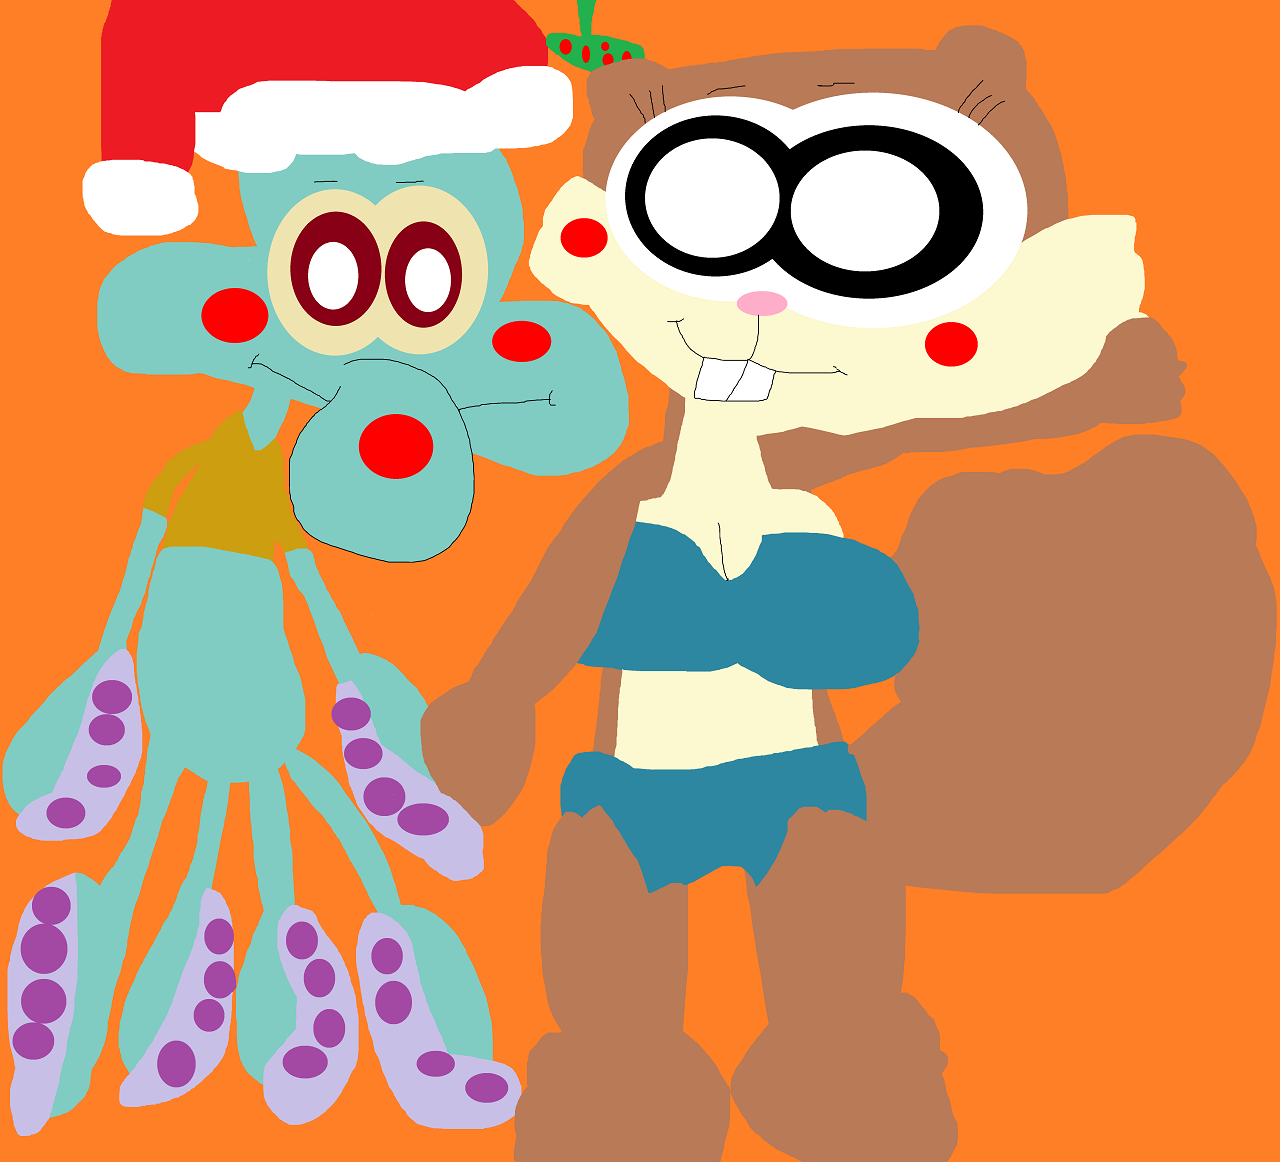 Squidward And Sandy About To Kiss Under The Mistletoe by Falconlobo